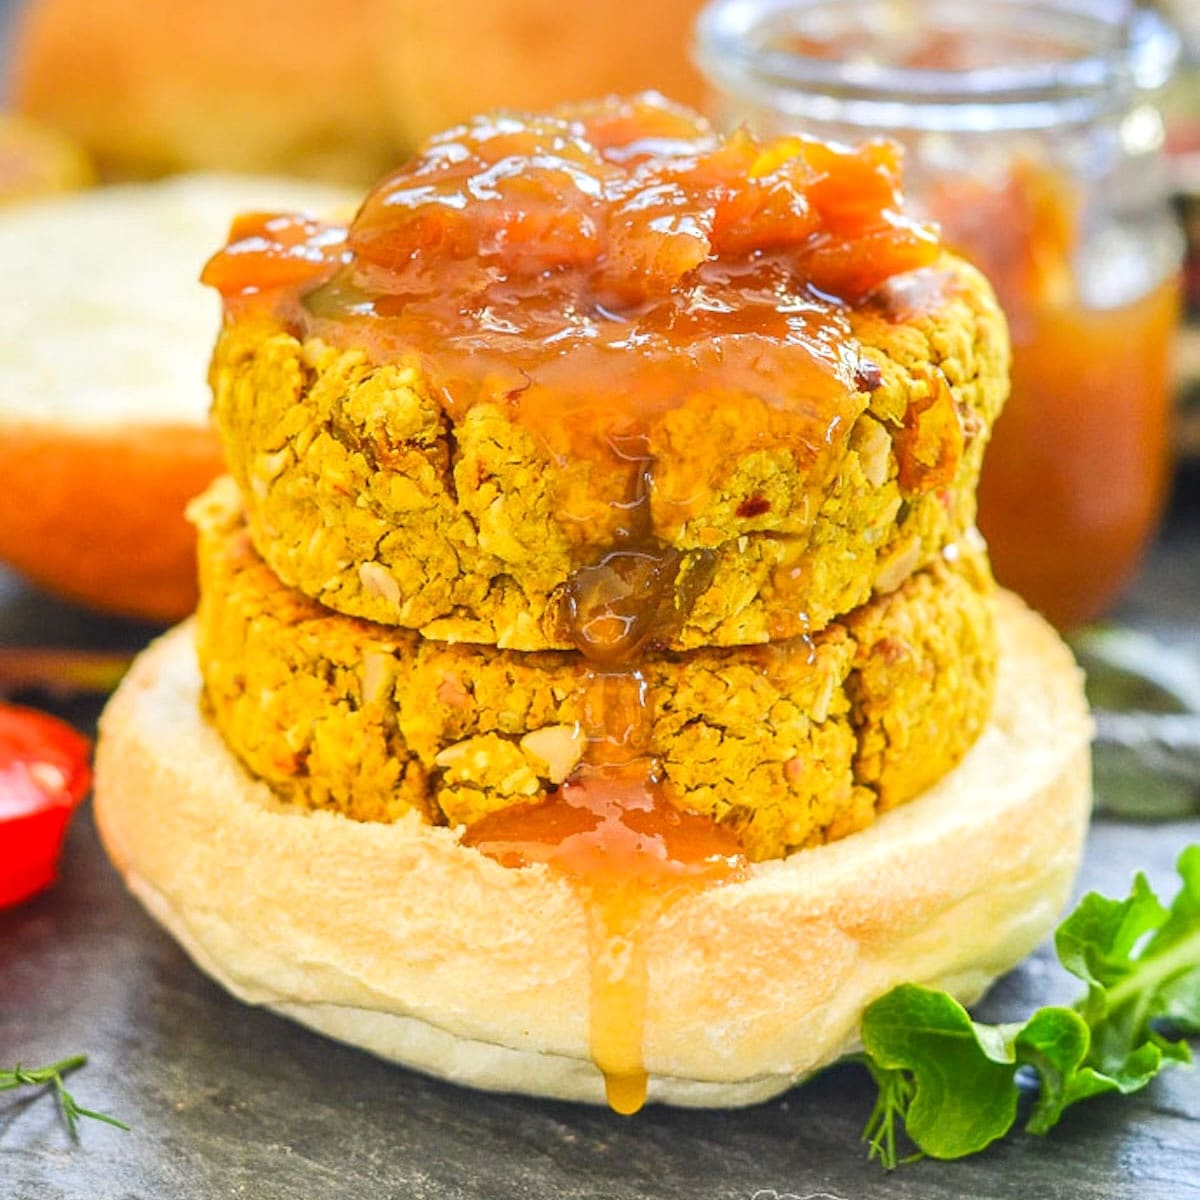 stacked curried chickpea burgers drizzled in mango chutney.